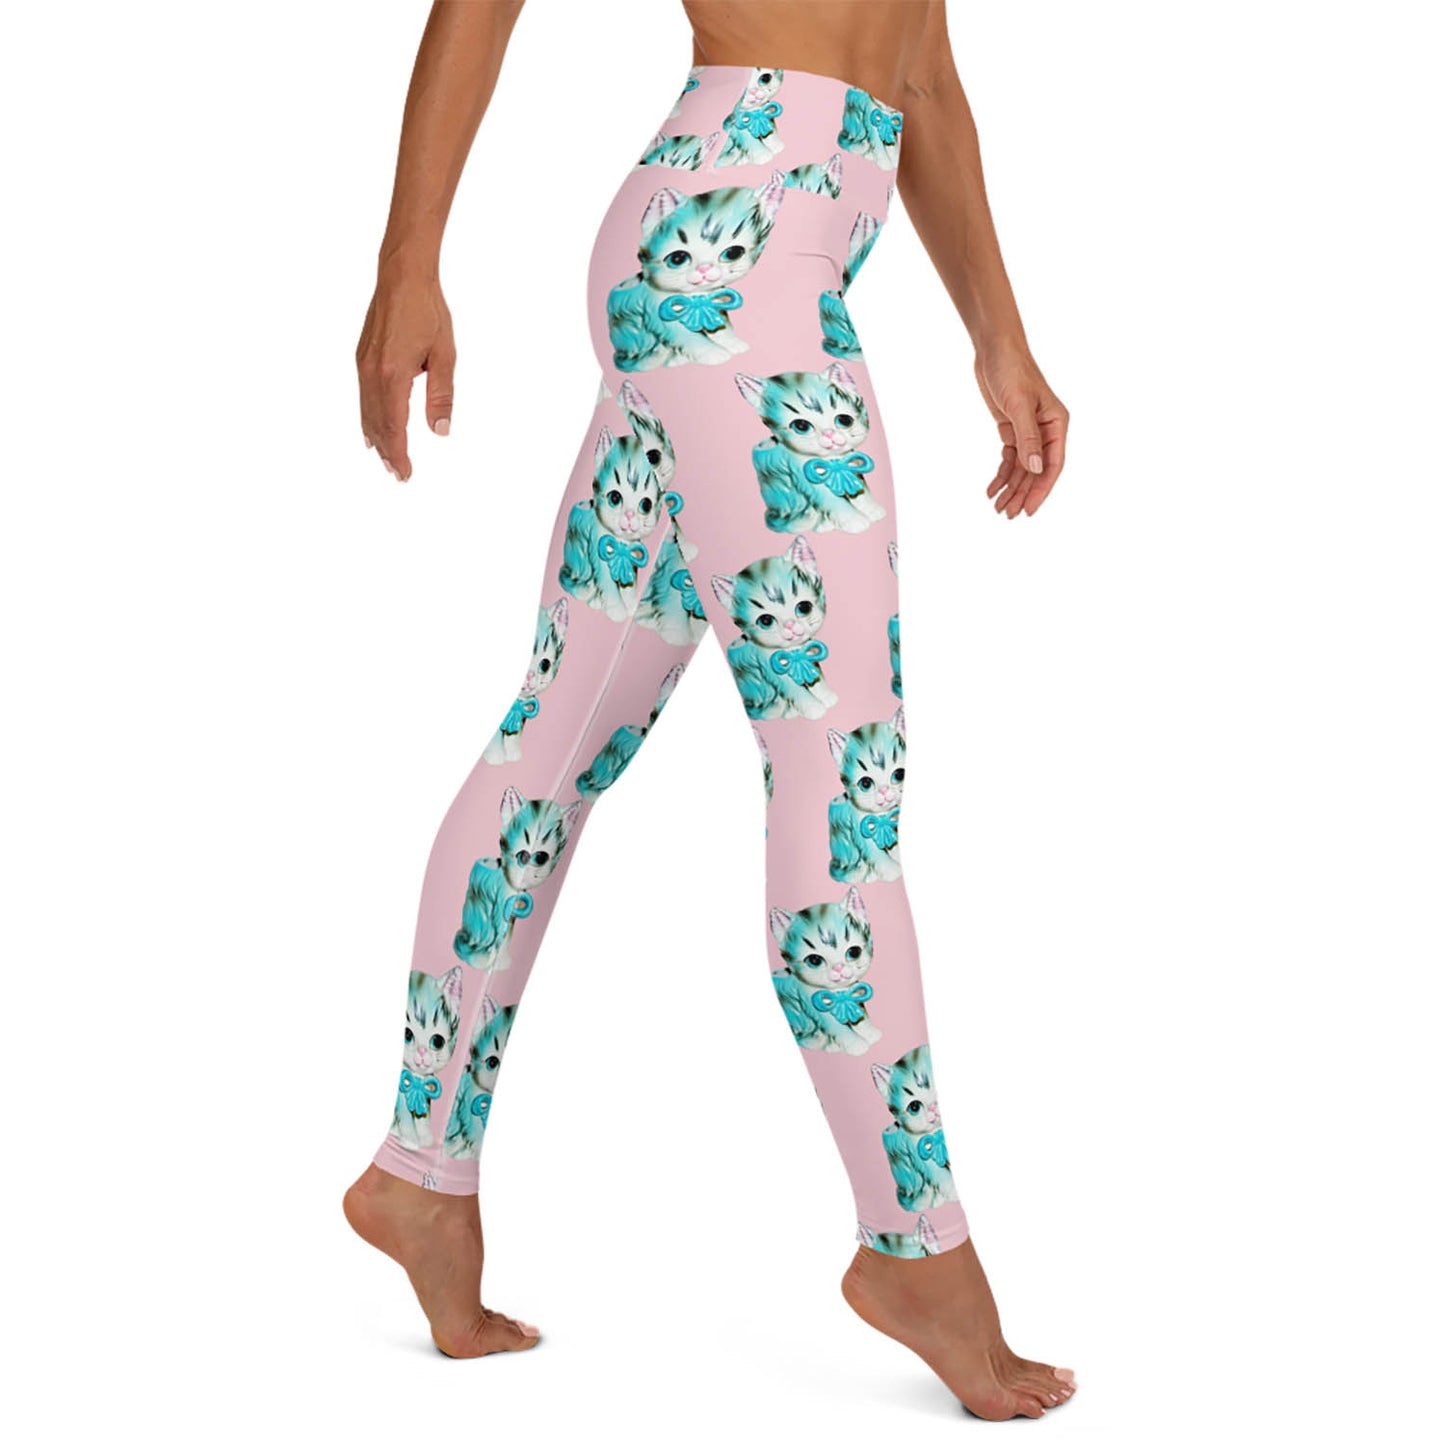 Vintage Kitty Cat High Waisted Workout Leggings